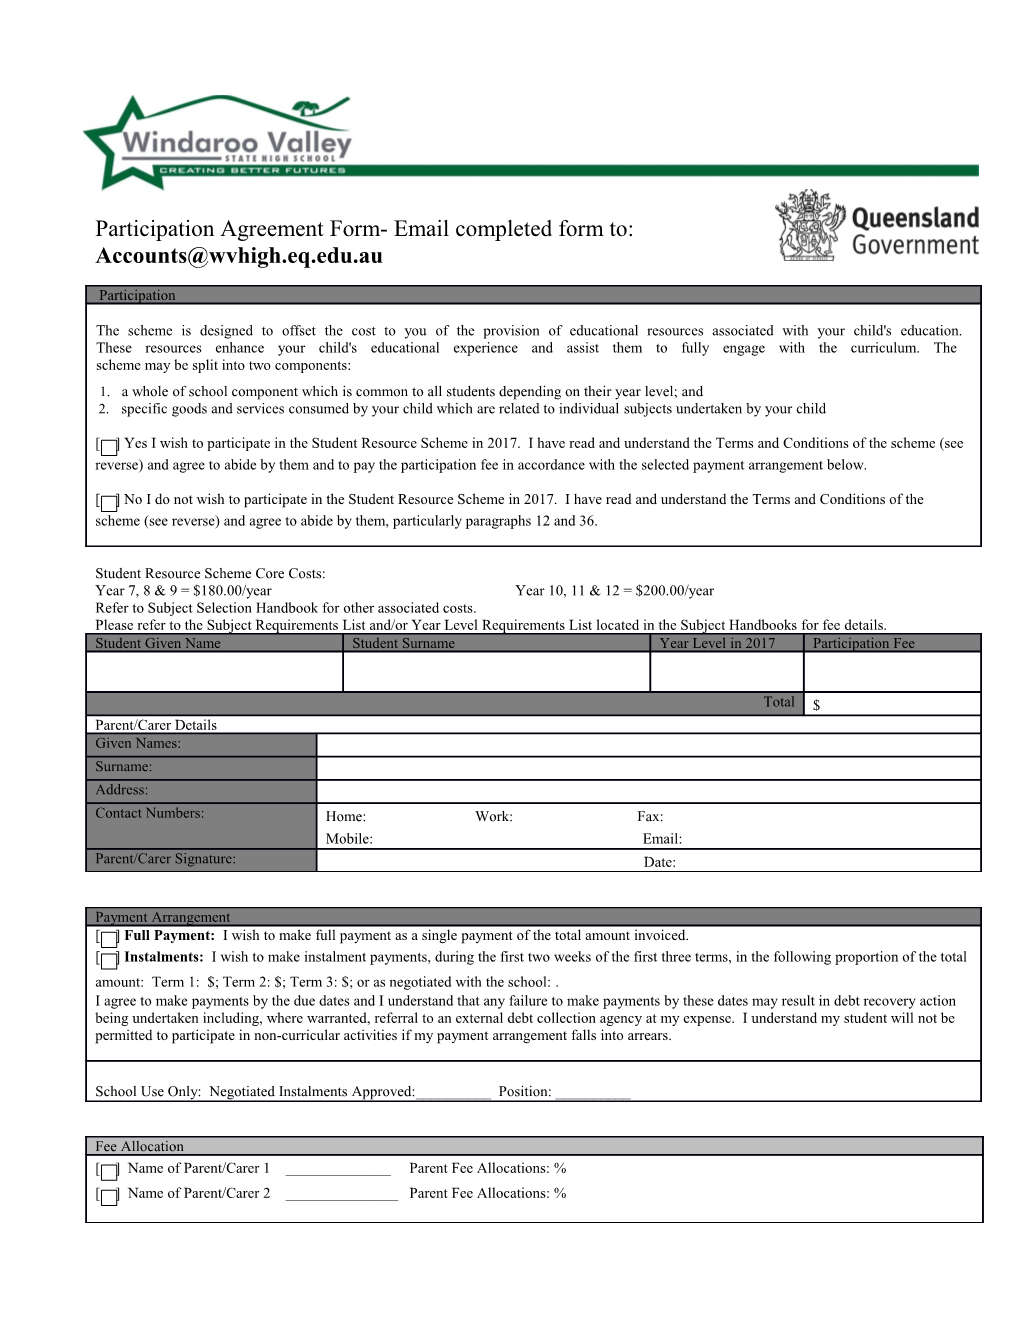 Participation Agreement Form- Email Completed Form To